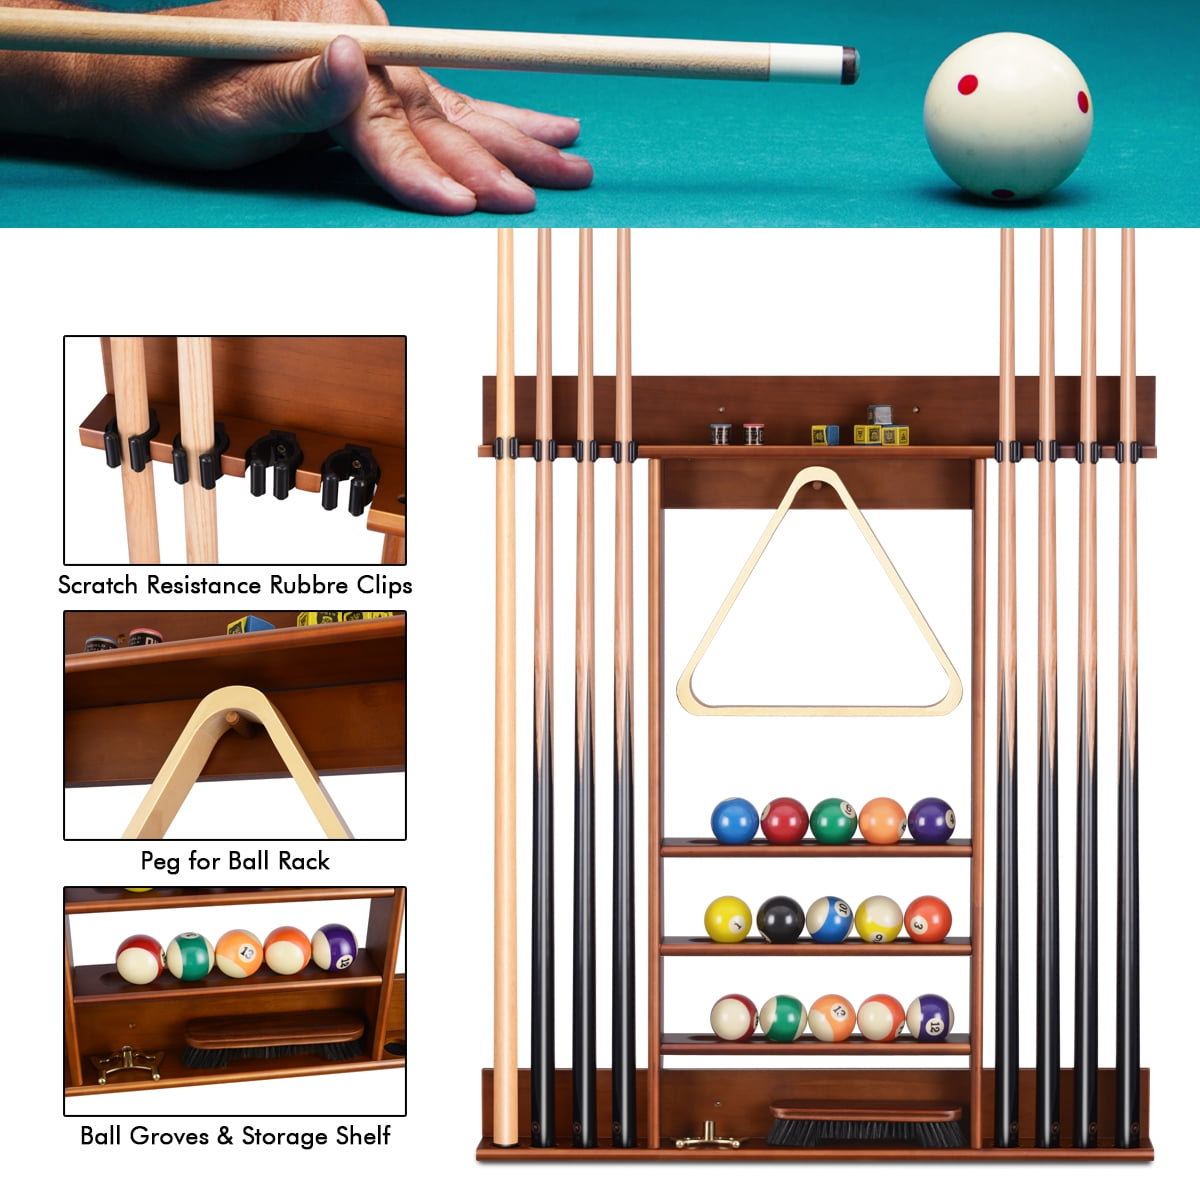 Details about   8 Pool Cue Rack Wood Sticks Storage Holder Floor Stand Billiard Table Accessorie 